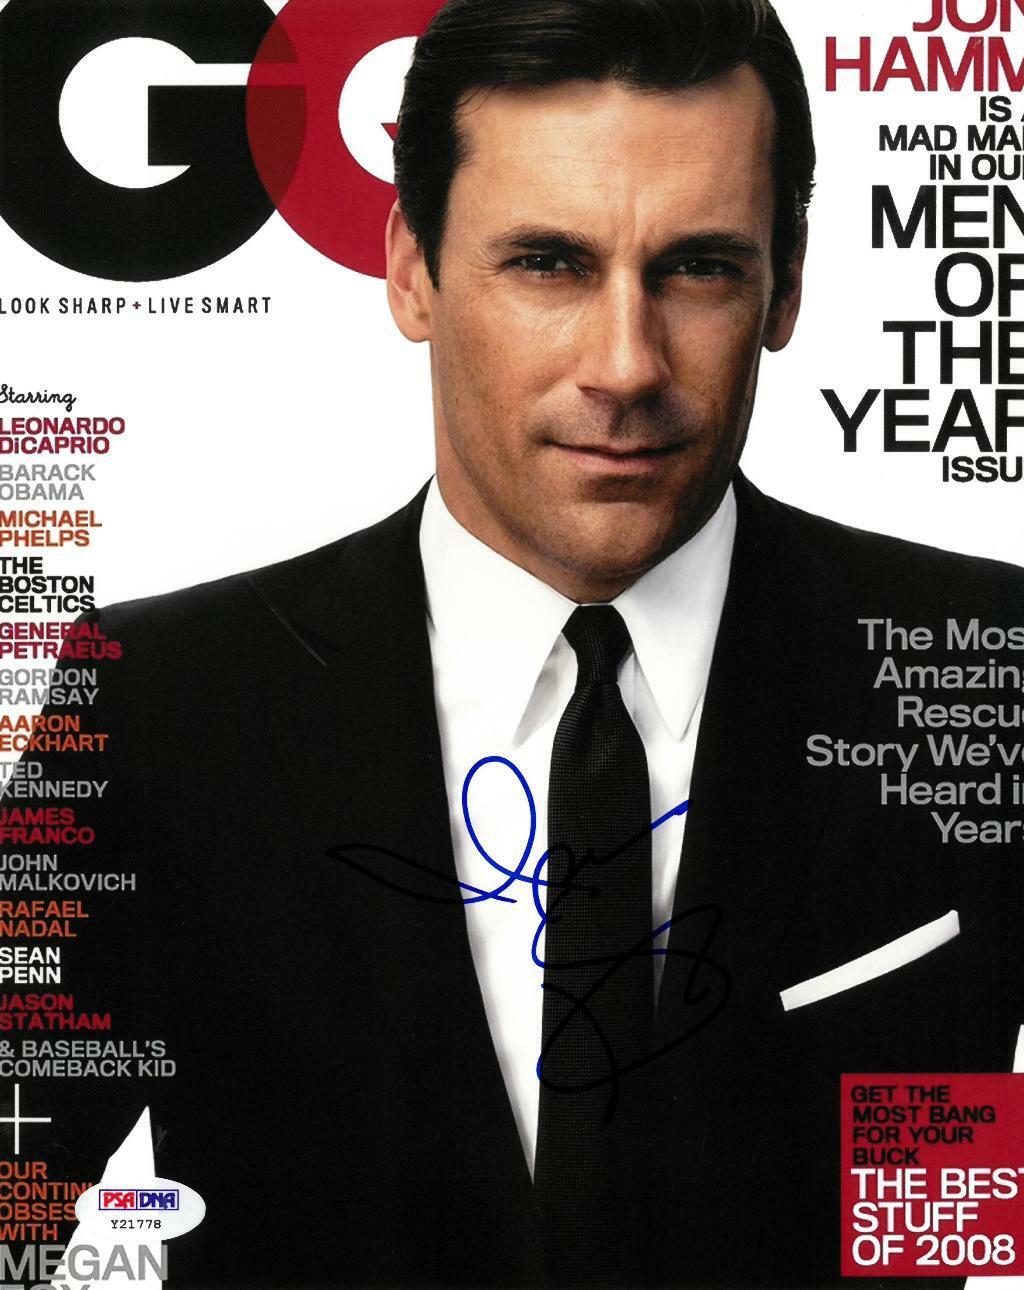 Jon Hamm Signed Authentic Autographed 8x10 Photo Poster painting PSA/DNA #Y21778